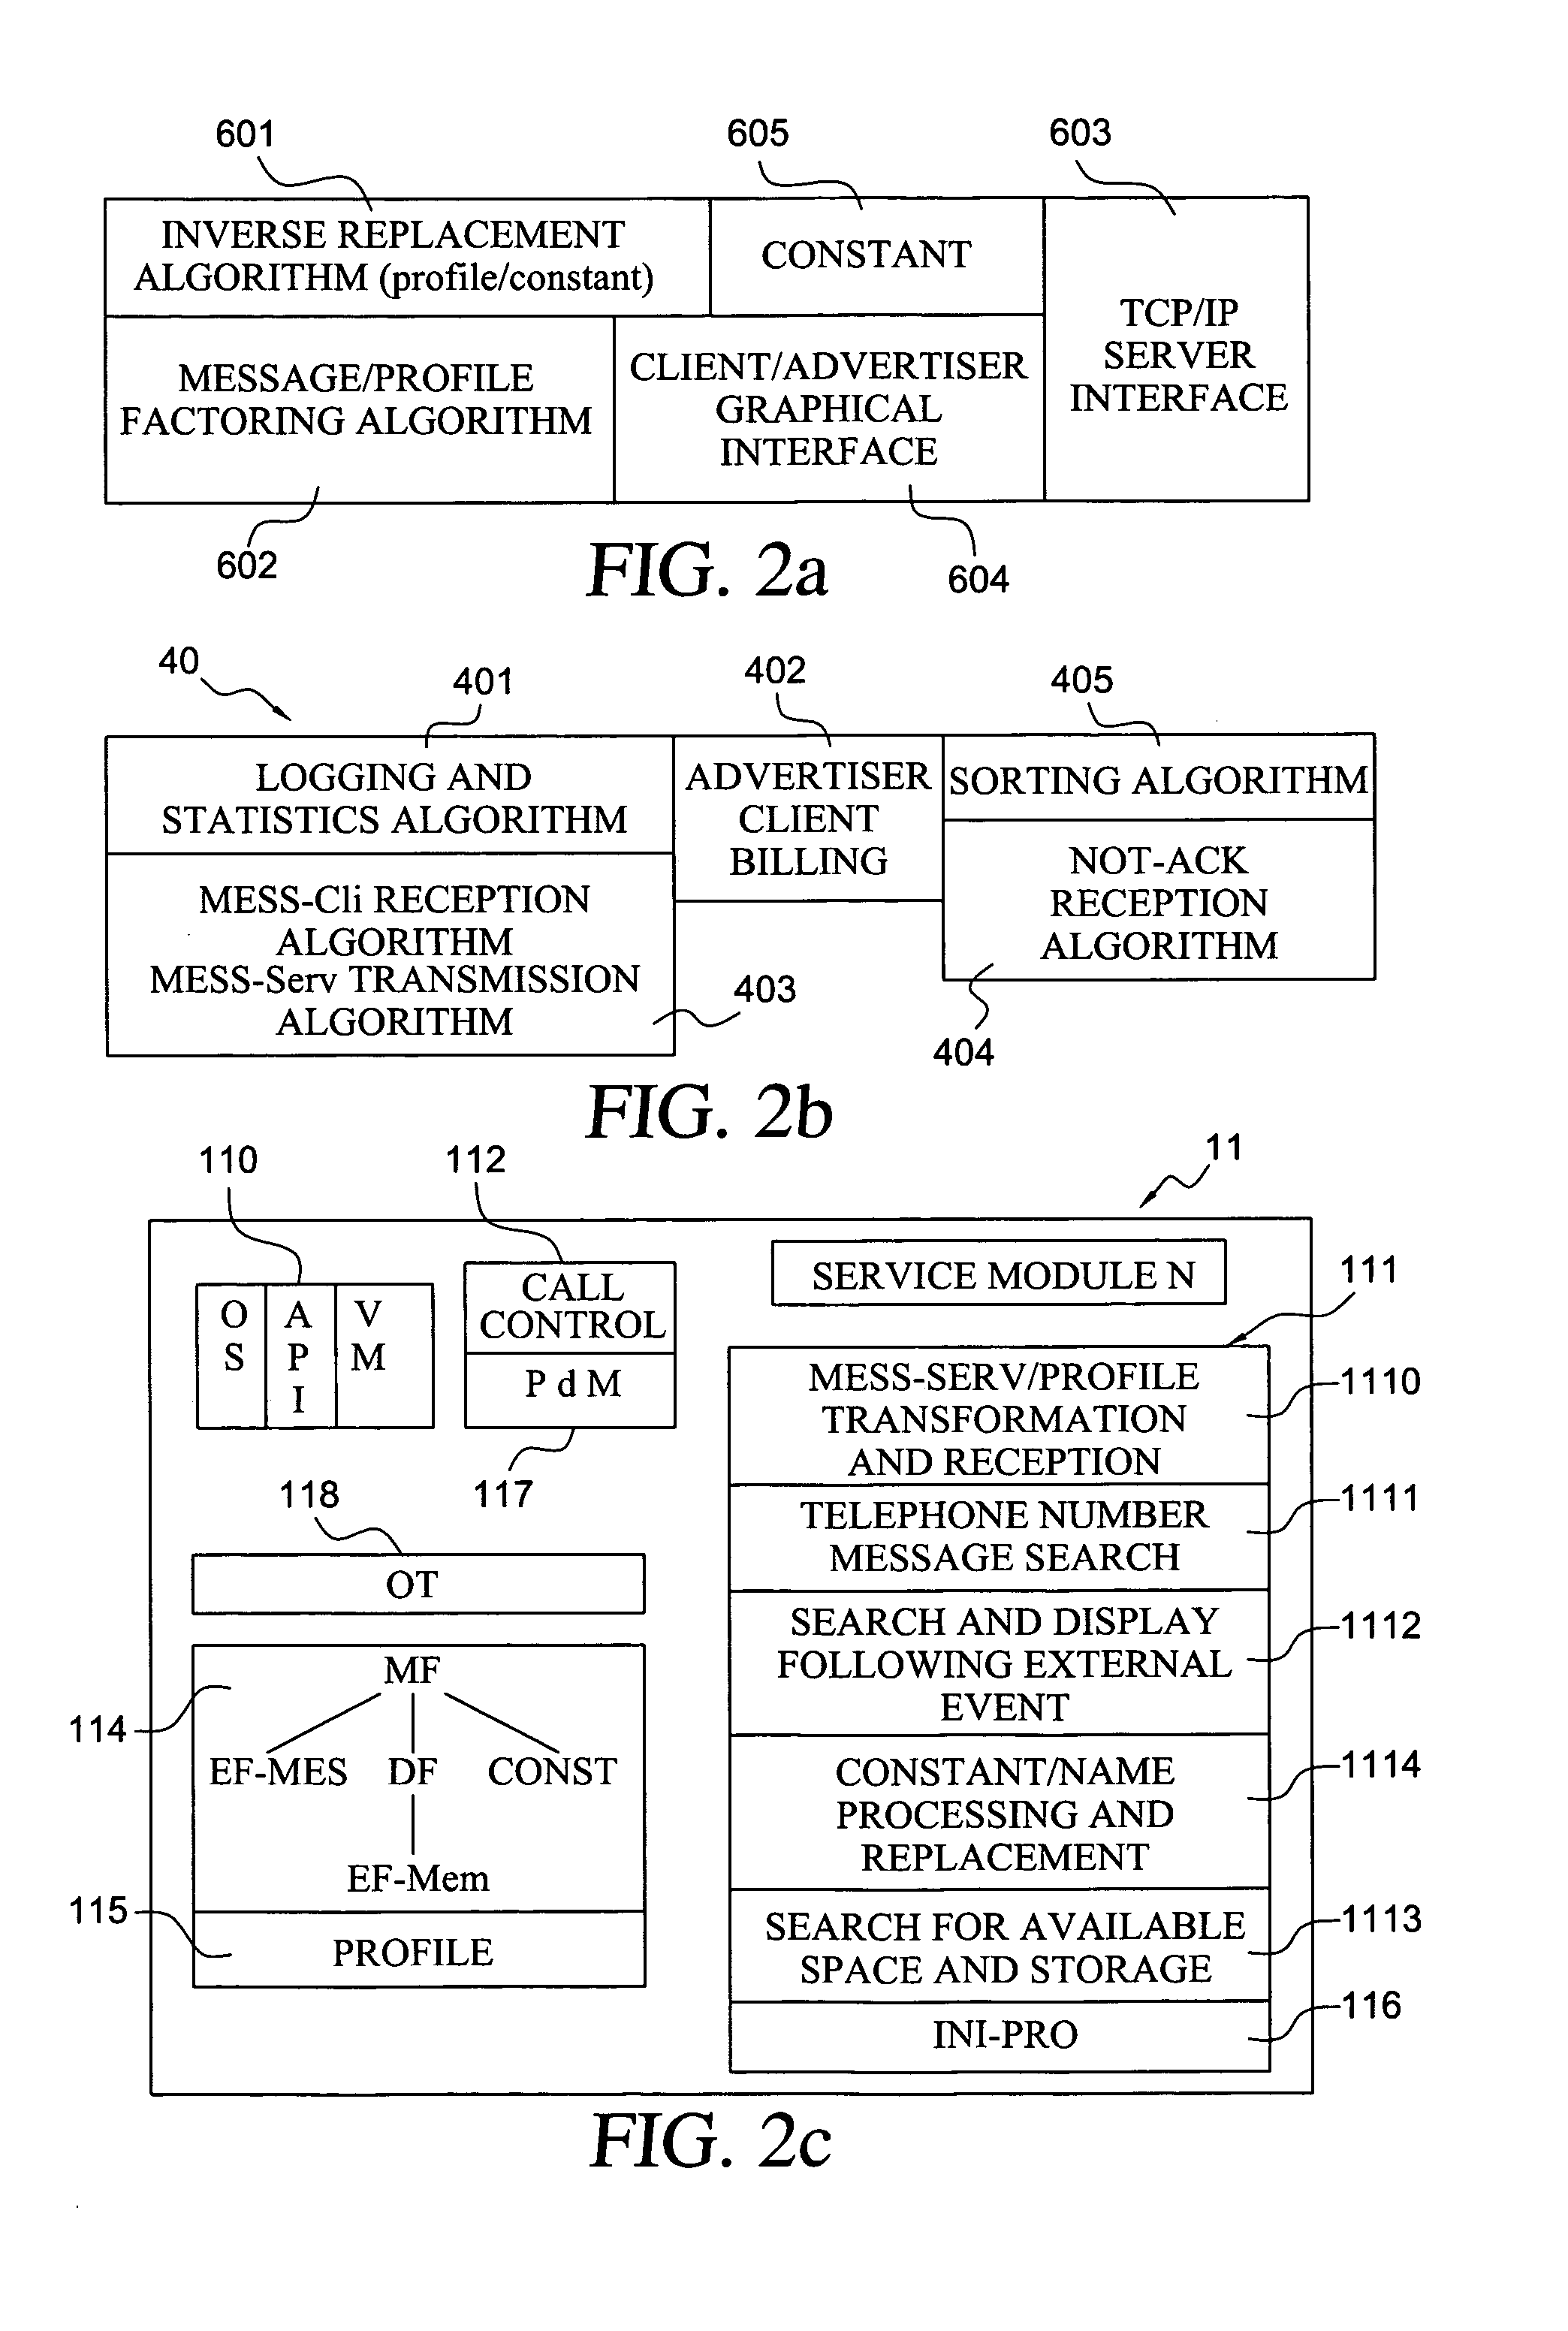 Message transmission system and method, and utilization of the transmission system to investigate services offered